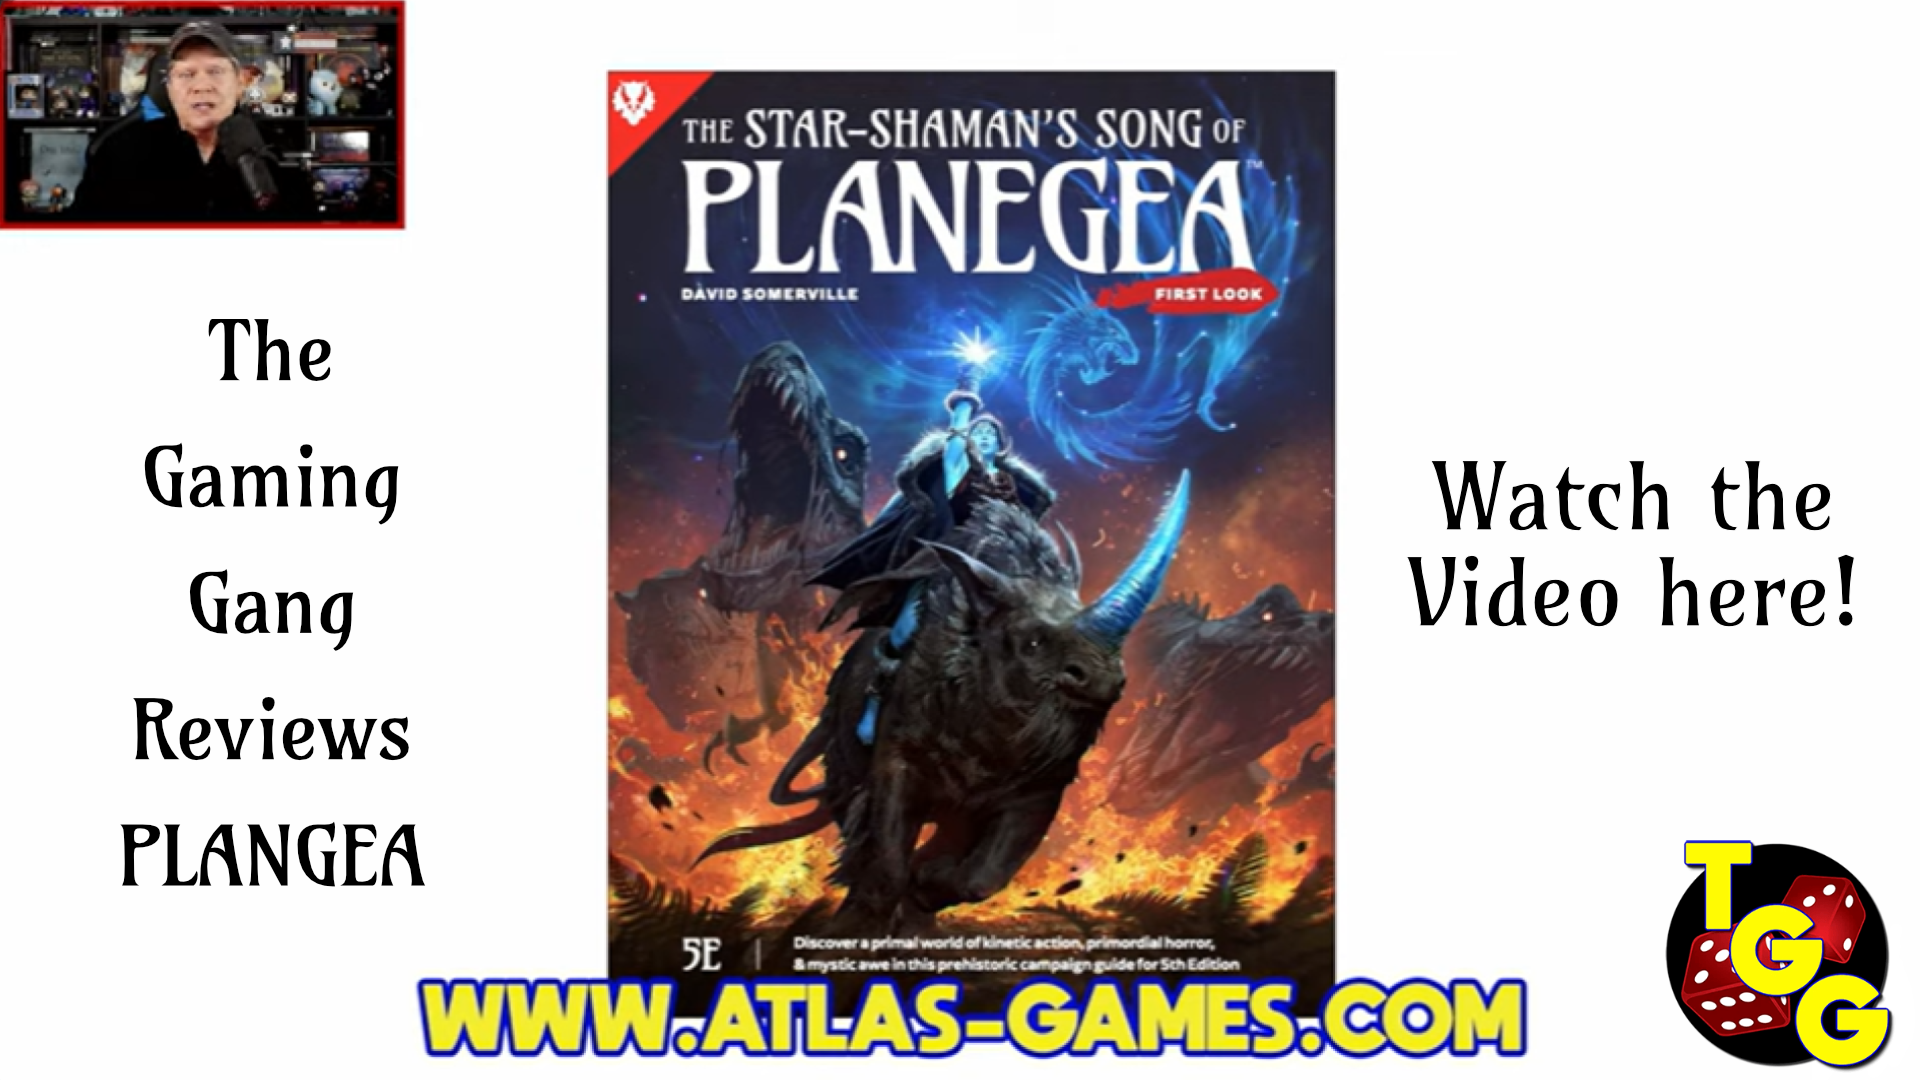 Gaming Gang Rave Review of Planegea